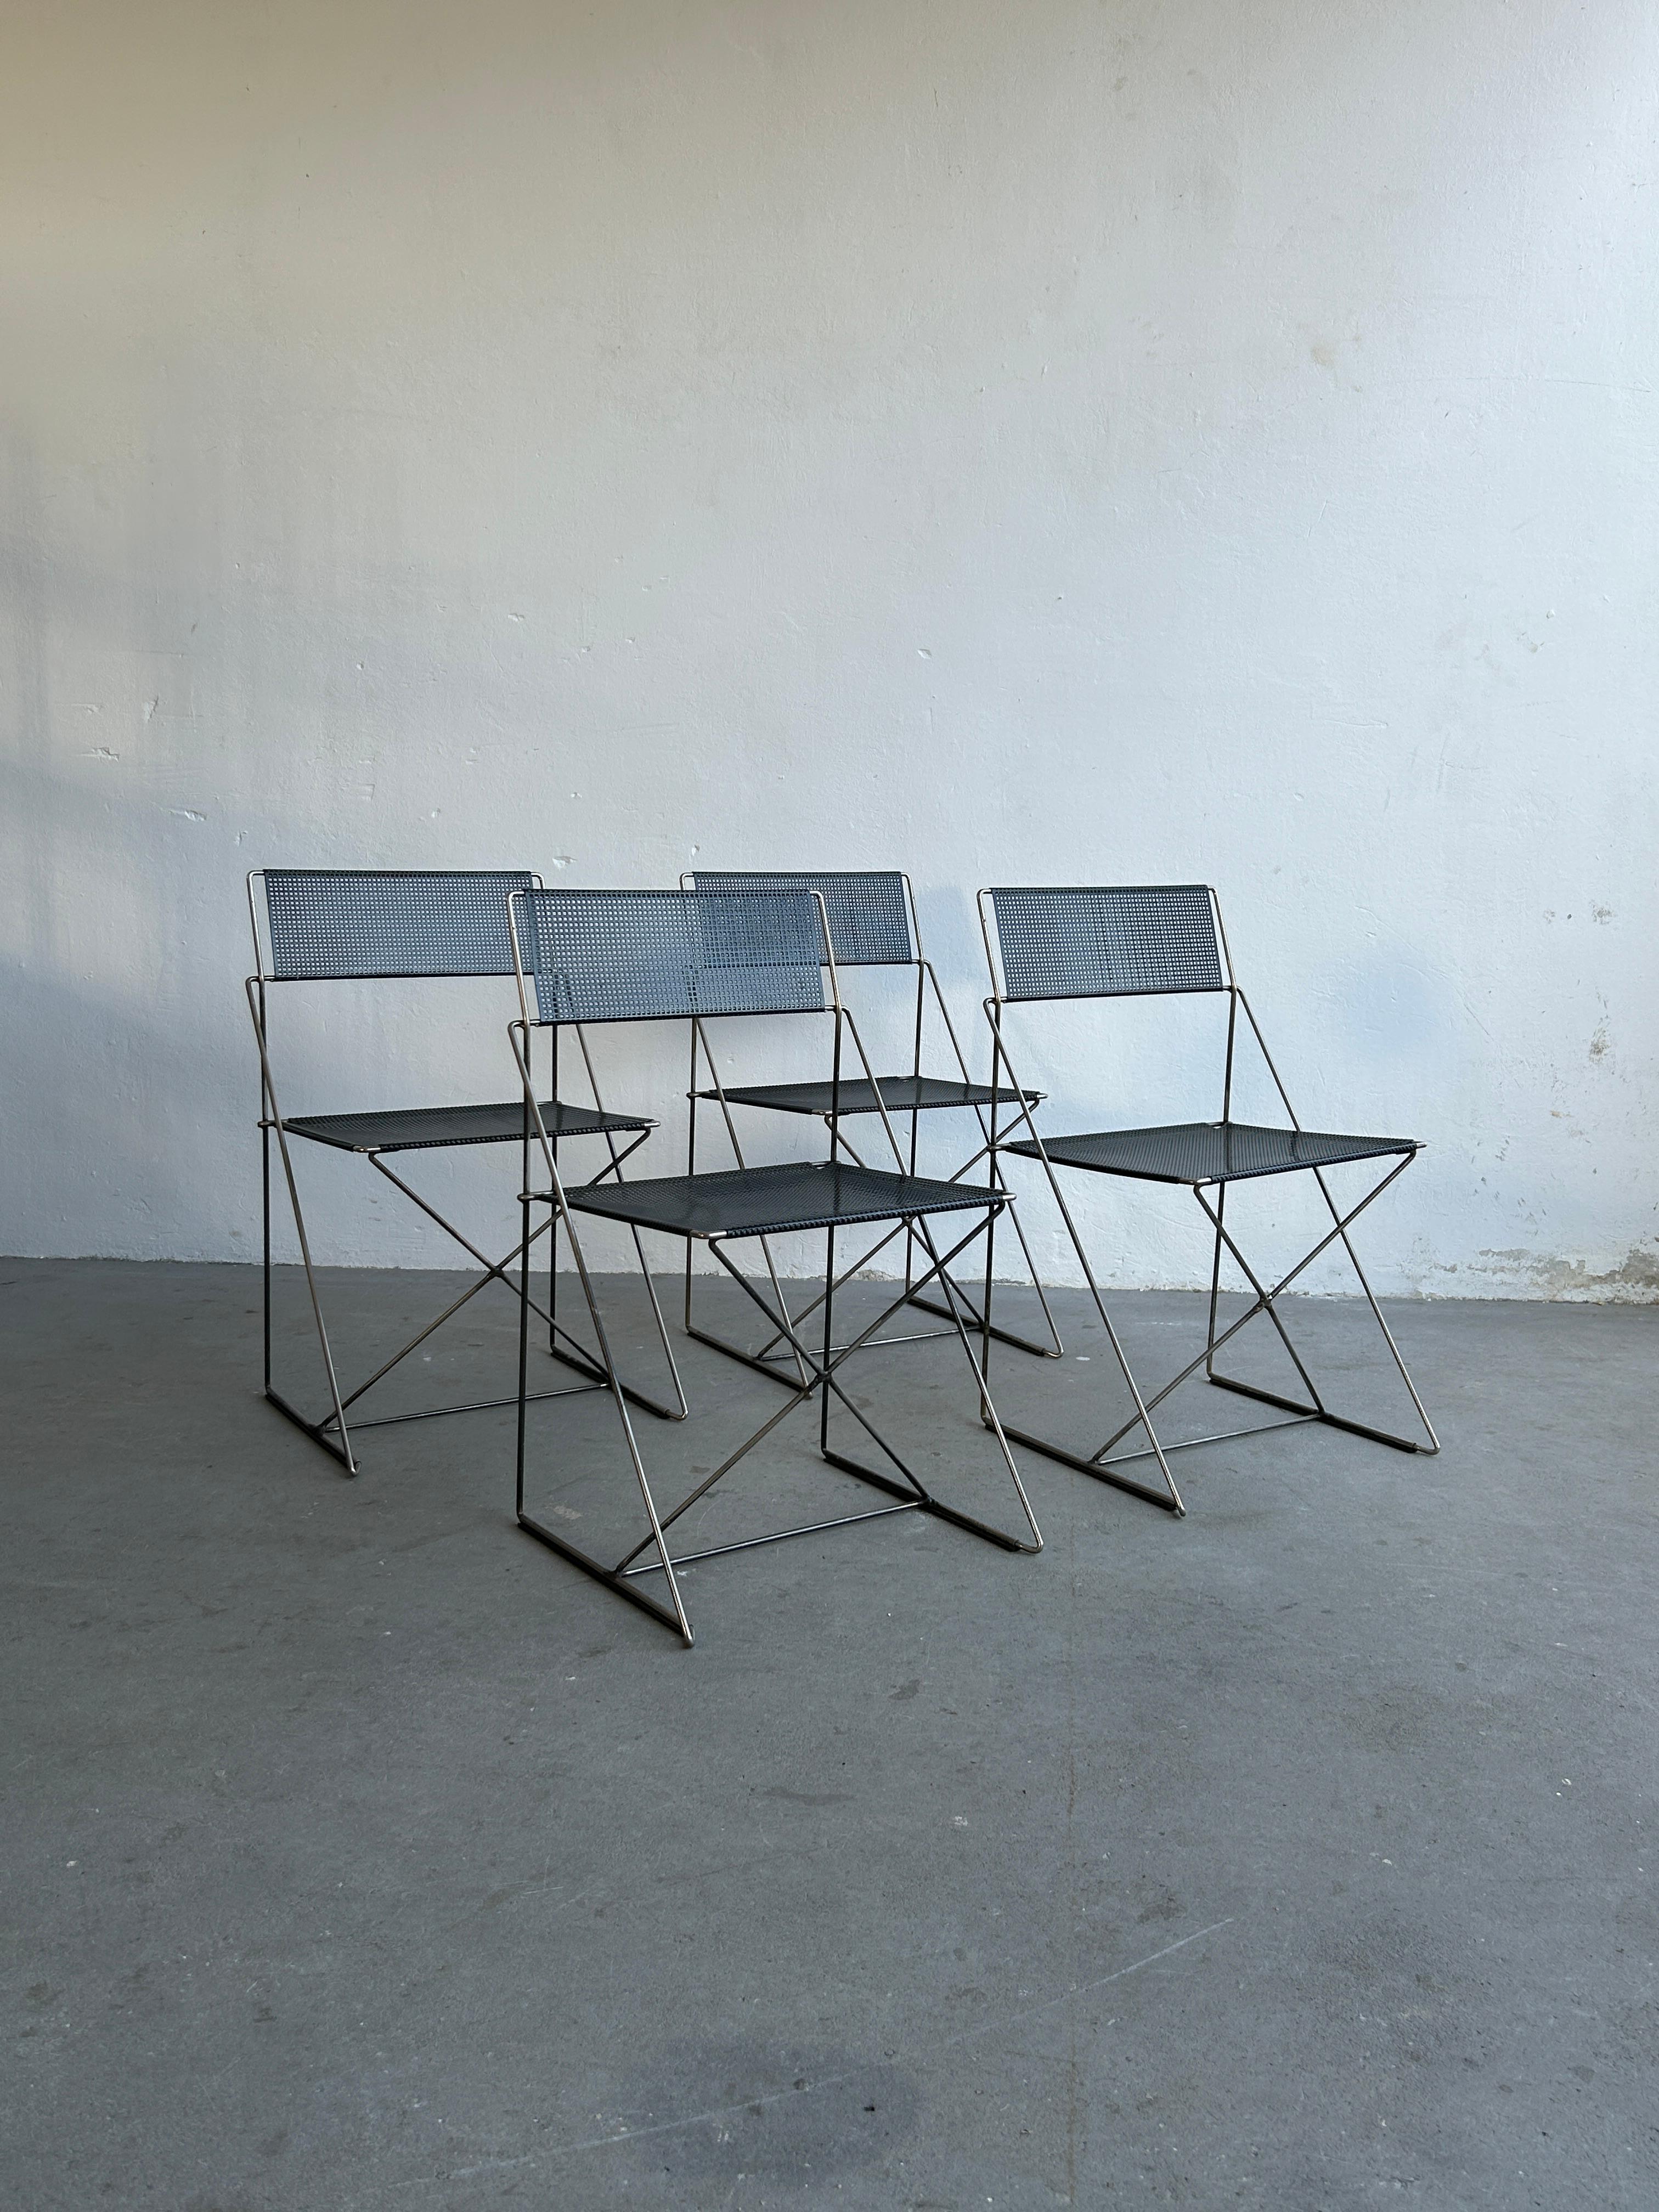 Set of four minimalist postmoderns X-Line chairs designed by Niels Jorgen Haugesen for Magis.
Made of chrome plated steel rods and black enamelled perforated steel backs and seats.
Stackable.

In very good vintage condition with expected signs